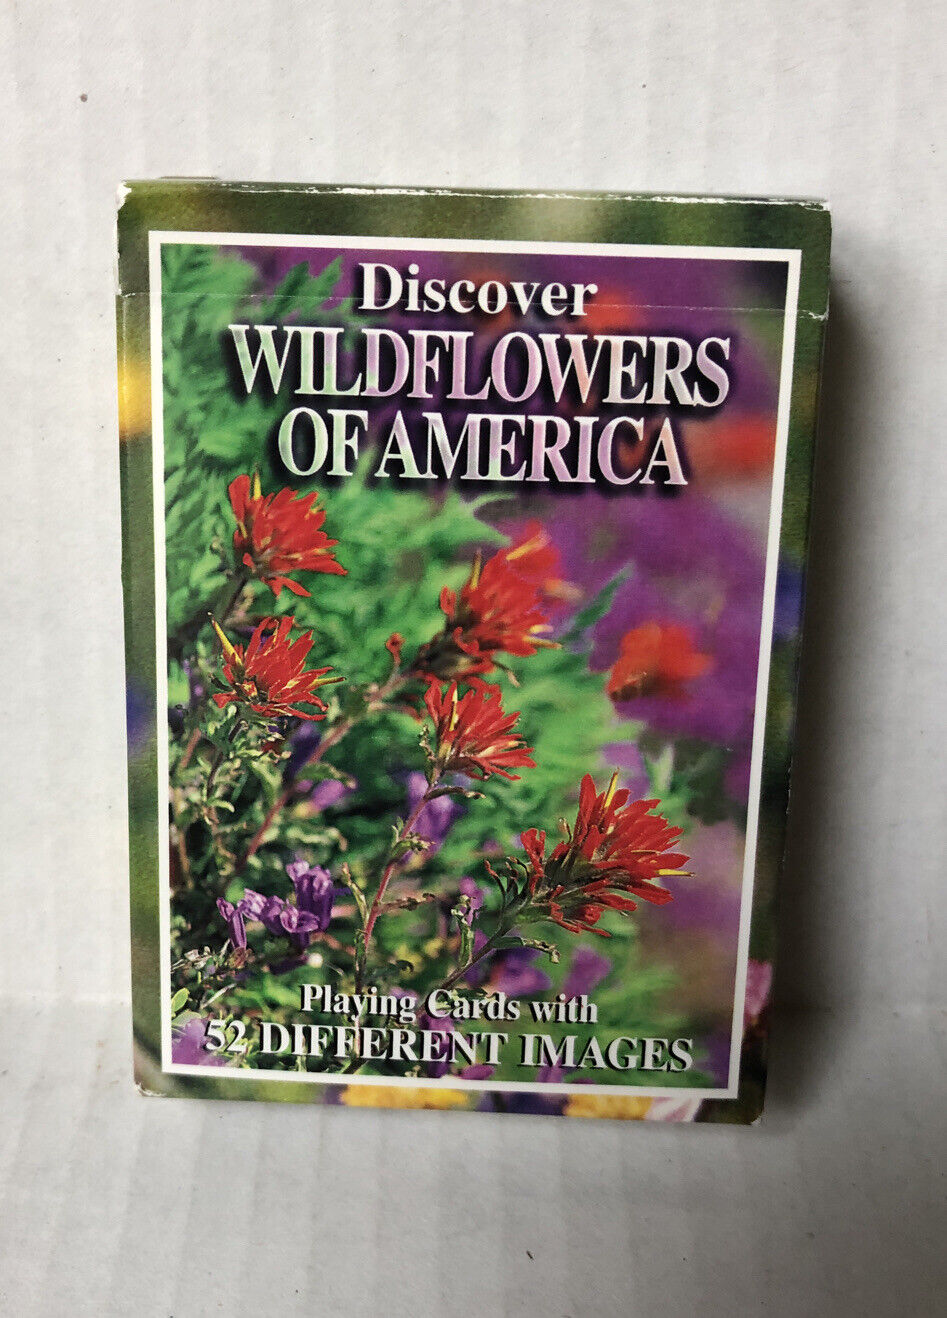 PLAYING CARDS DISCOVER WILDFLOWERS OF AMERICA 52 DIFFERENT IMAGES